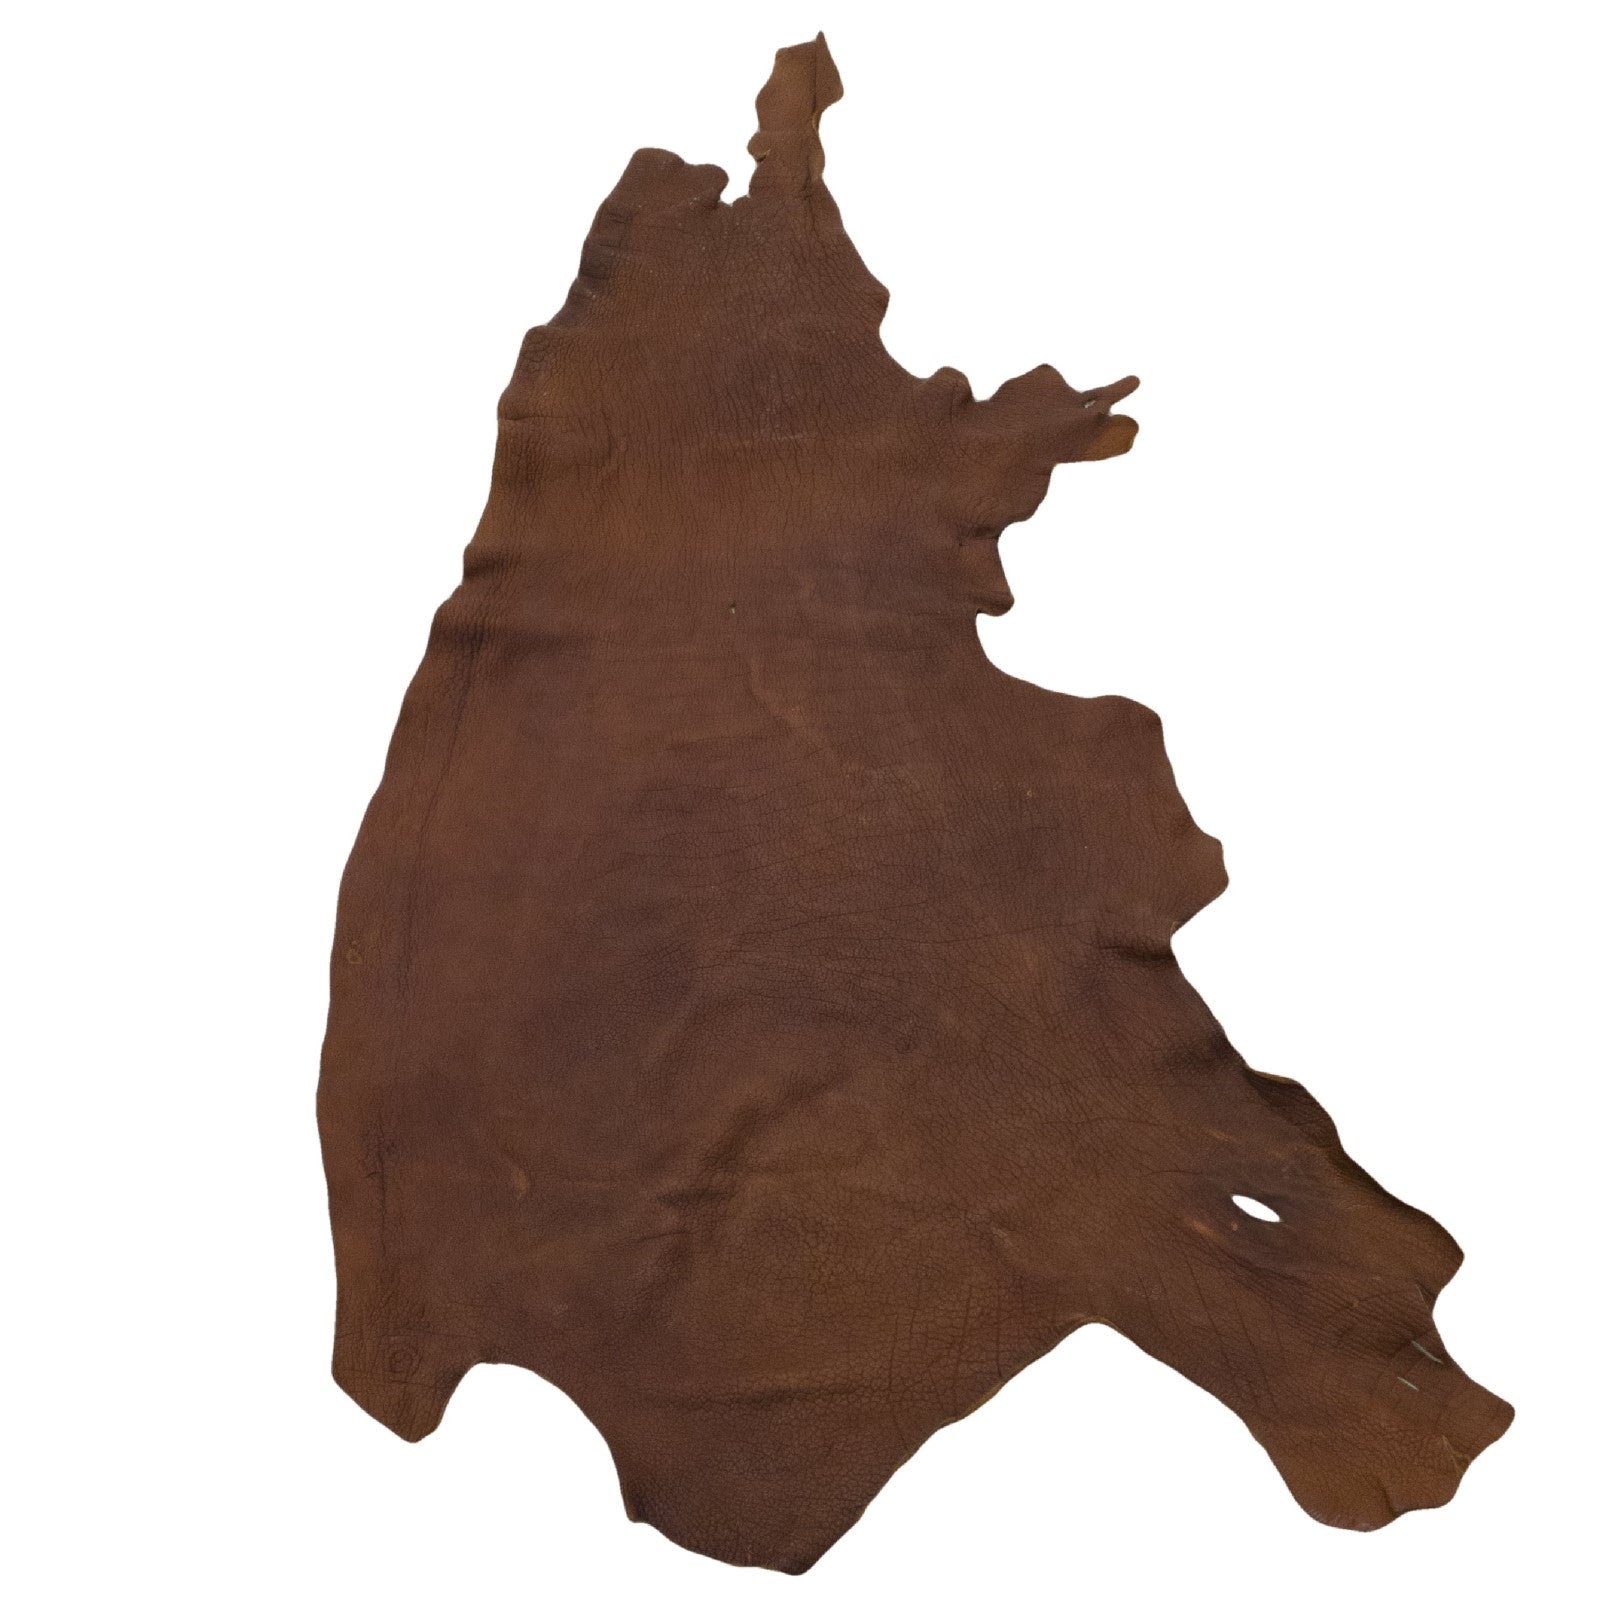 Roasted Brown, 5-7 oz, 15-17 Sq Ft, Bison Sides, 15-17 Sq Ft | The Leather Guy